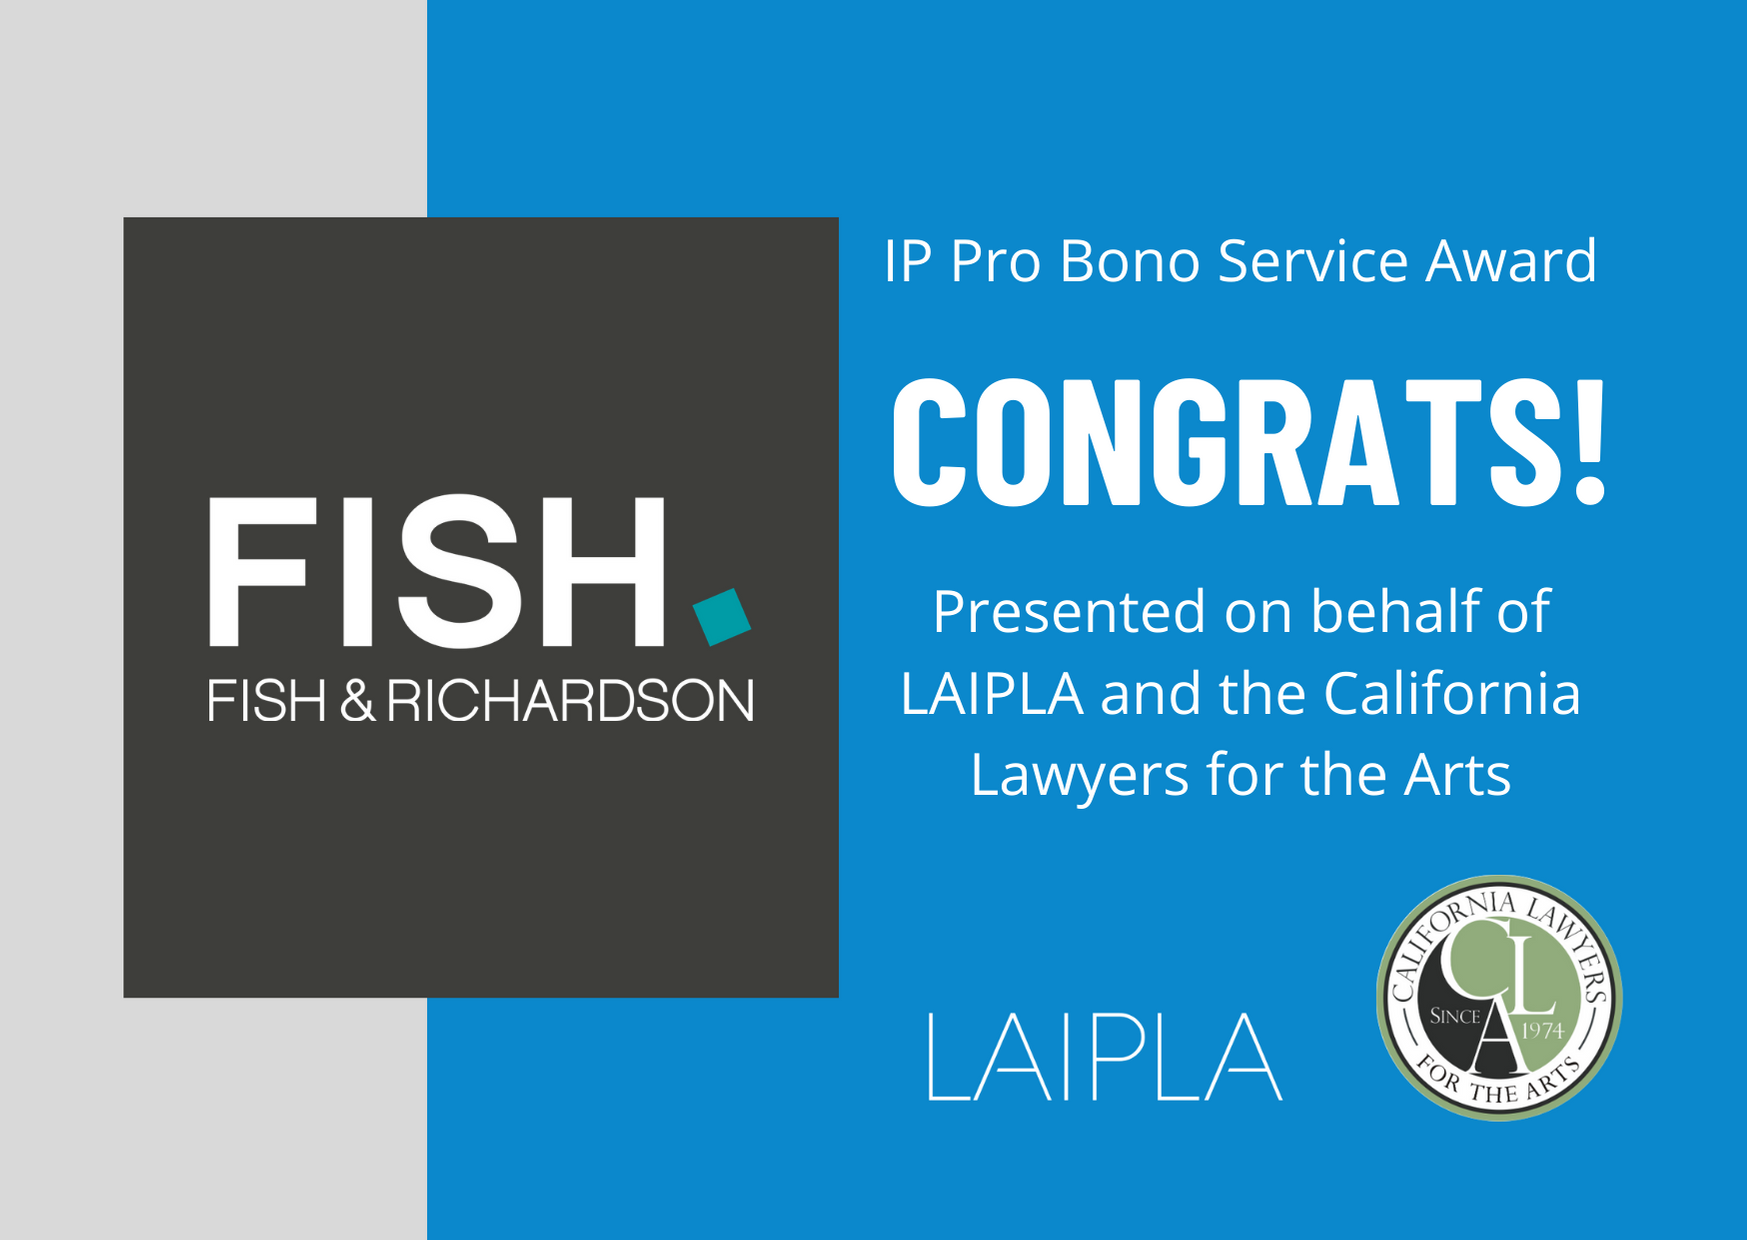 Fish & Richardson - Recipient of the IP Pro Bono Service Award, presented on behalf of LAIPLA and the California Lawyers for the Arts